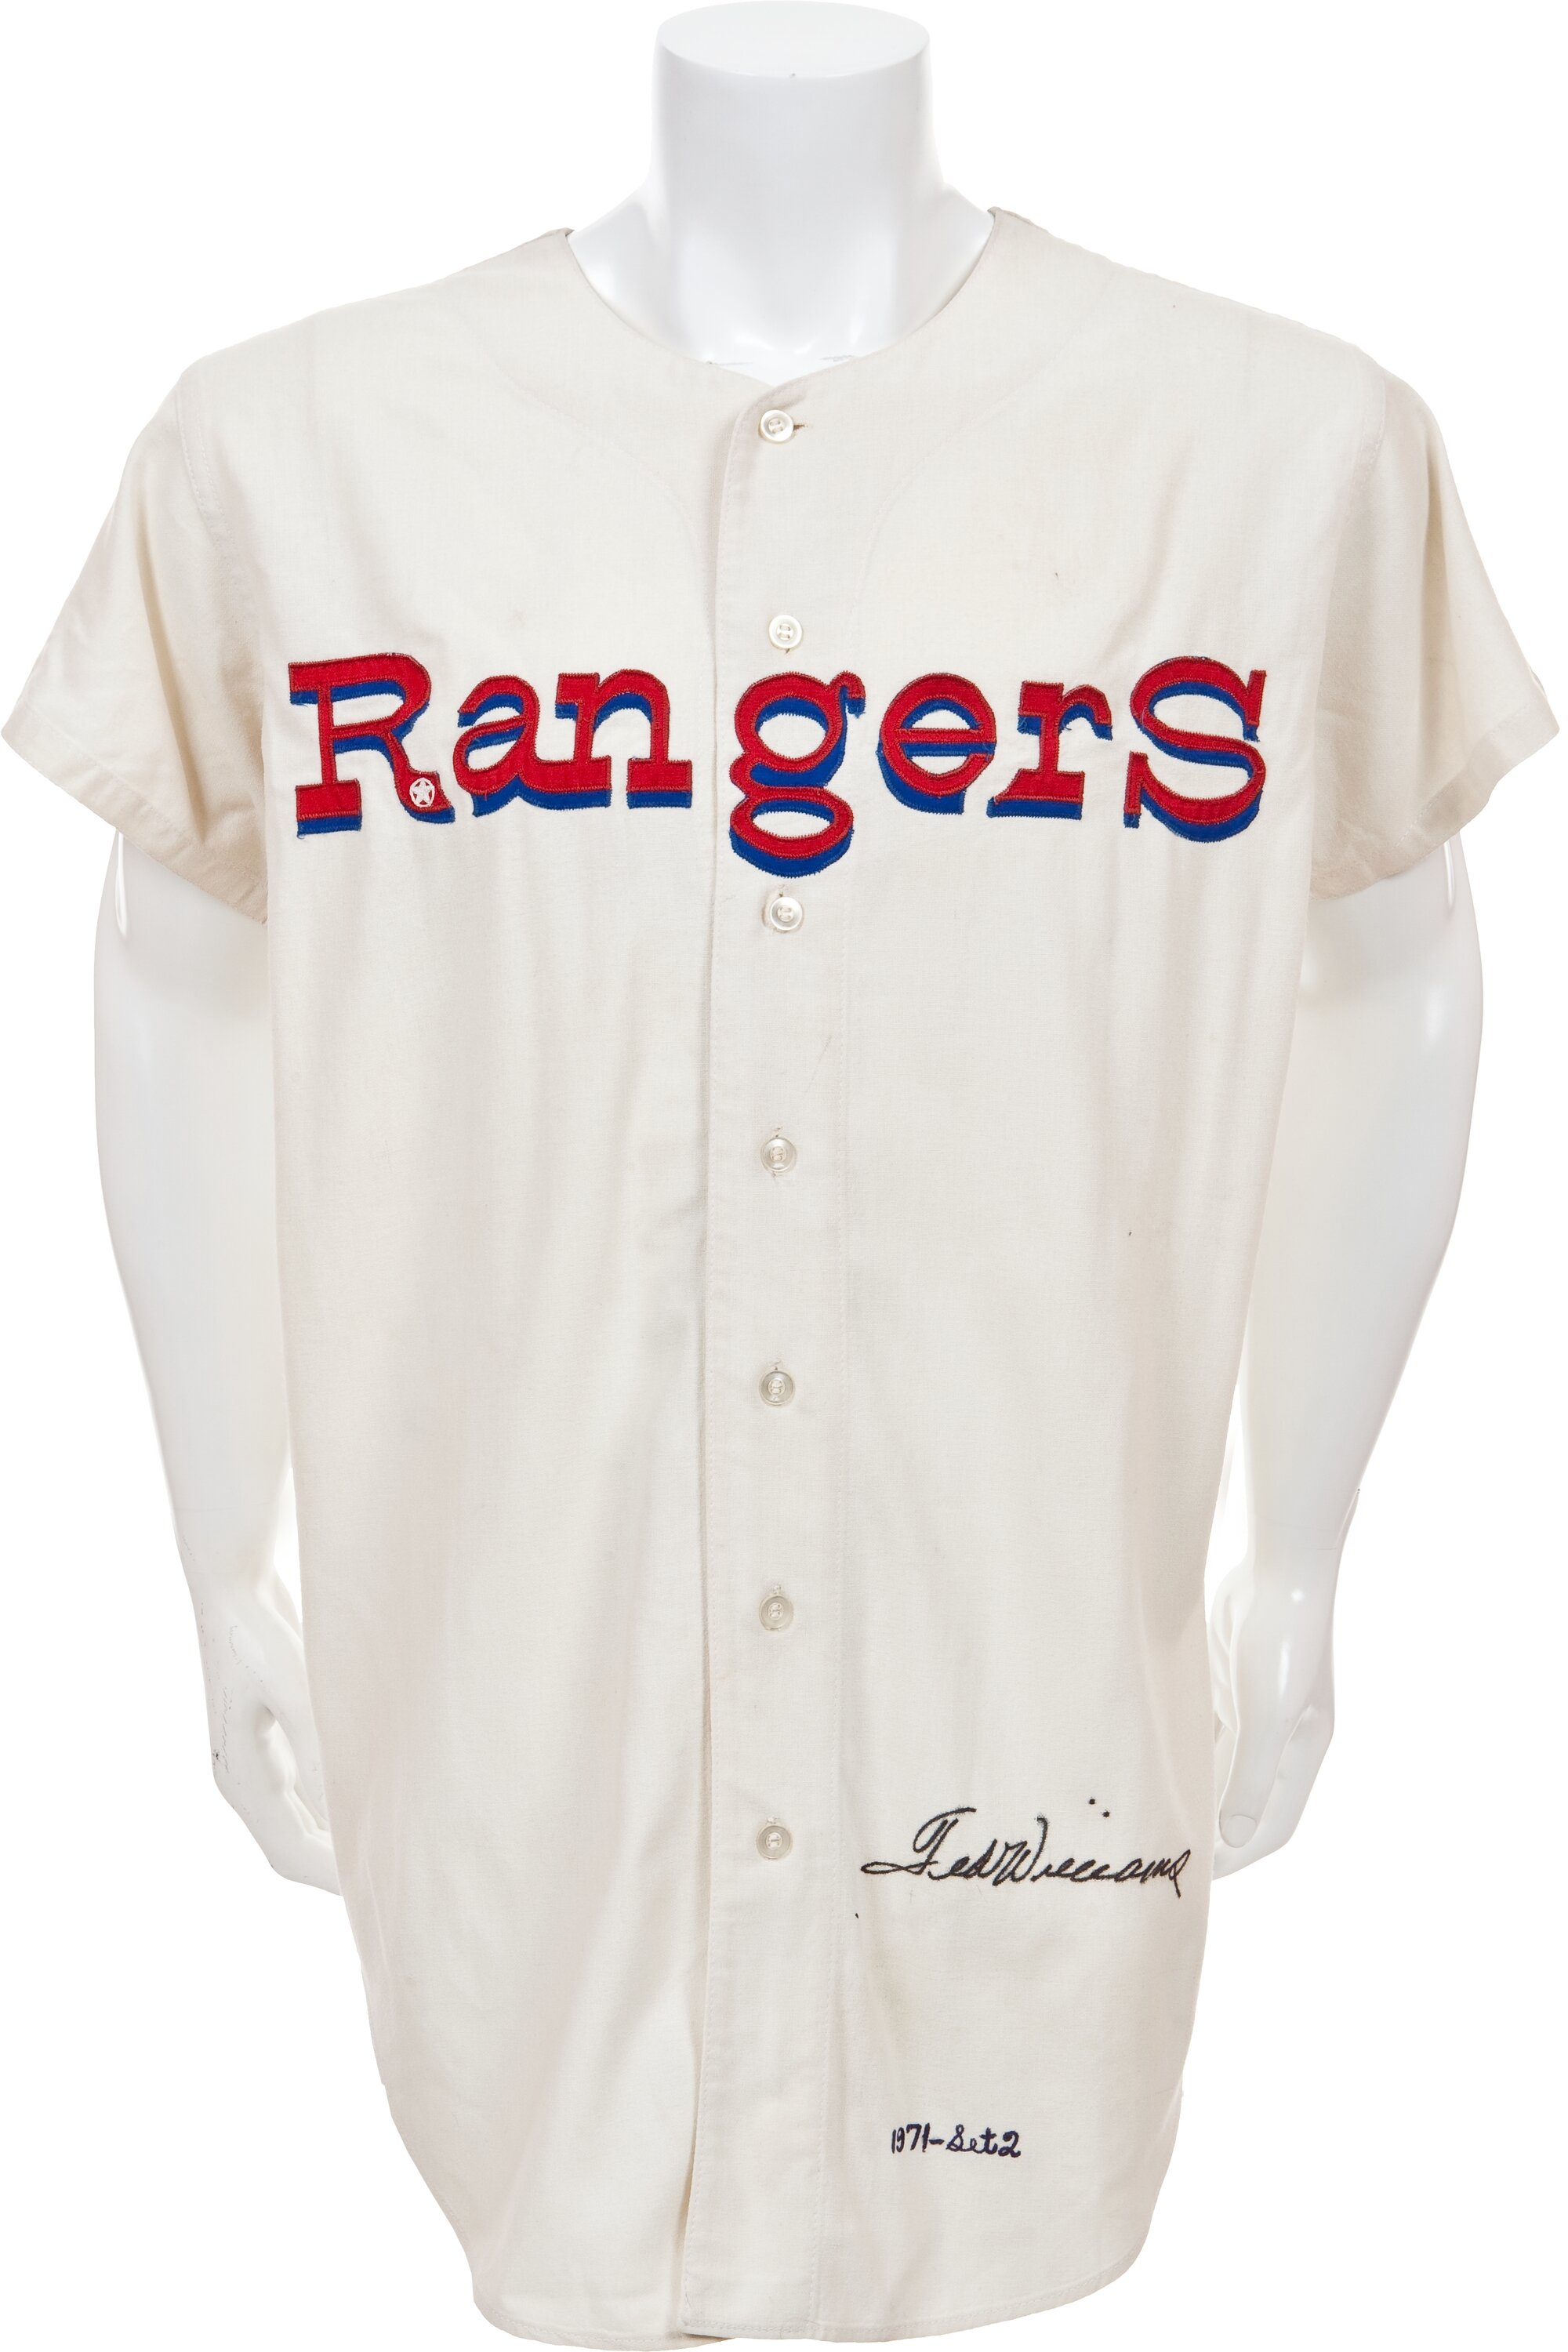 Lot Detail - 1971-72 Ted Williams Washington Senators /Texas Rangers  Game-Used Road Jersey-The Last Major League Flannel Jersey He Ever Wore!